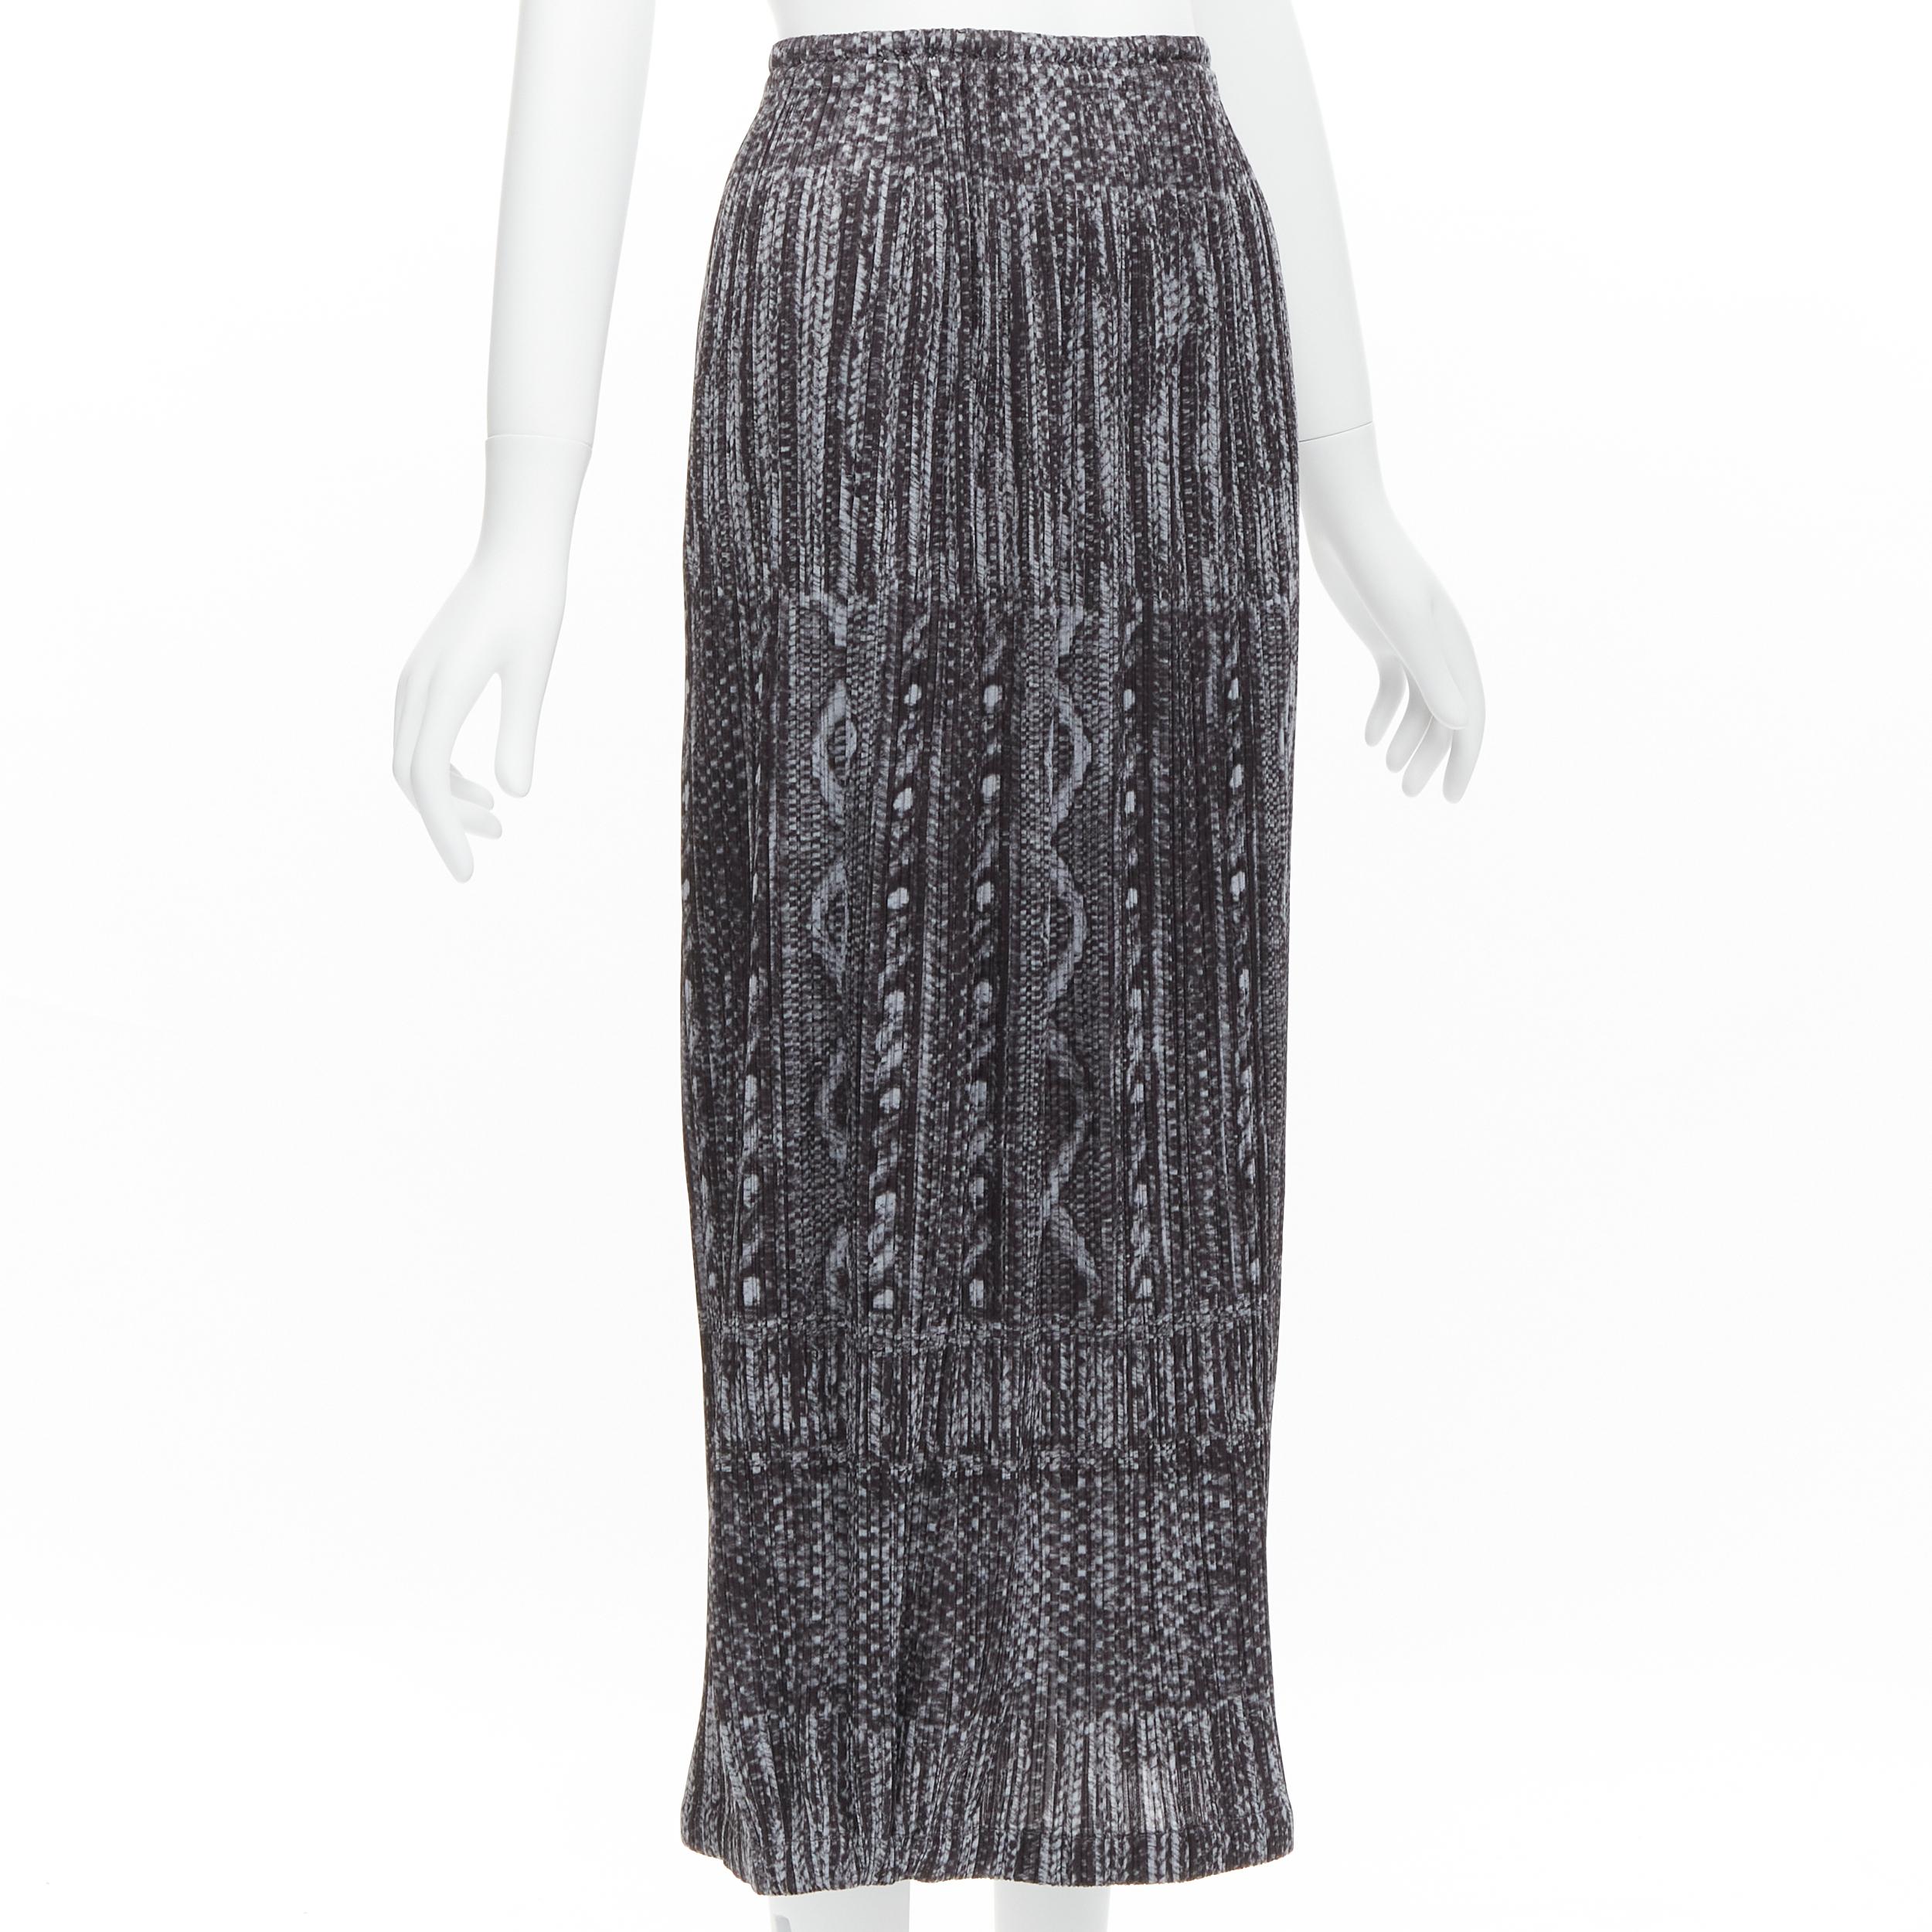 ISSEY MIYAKE PLEATS PLEASE grey black cable knit print pleated midi skirt JP2 M
Reference: TGAS/C01967
Brand: Issey Miyake
Model: Pleats Please
Material: Polyester
Color: Grey, Black
Pattern: Photographic Print
Closure: Elasticated
Made in: